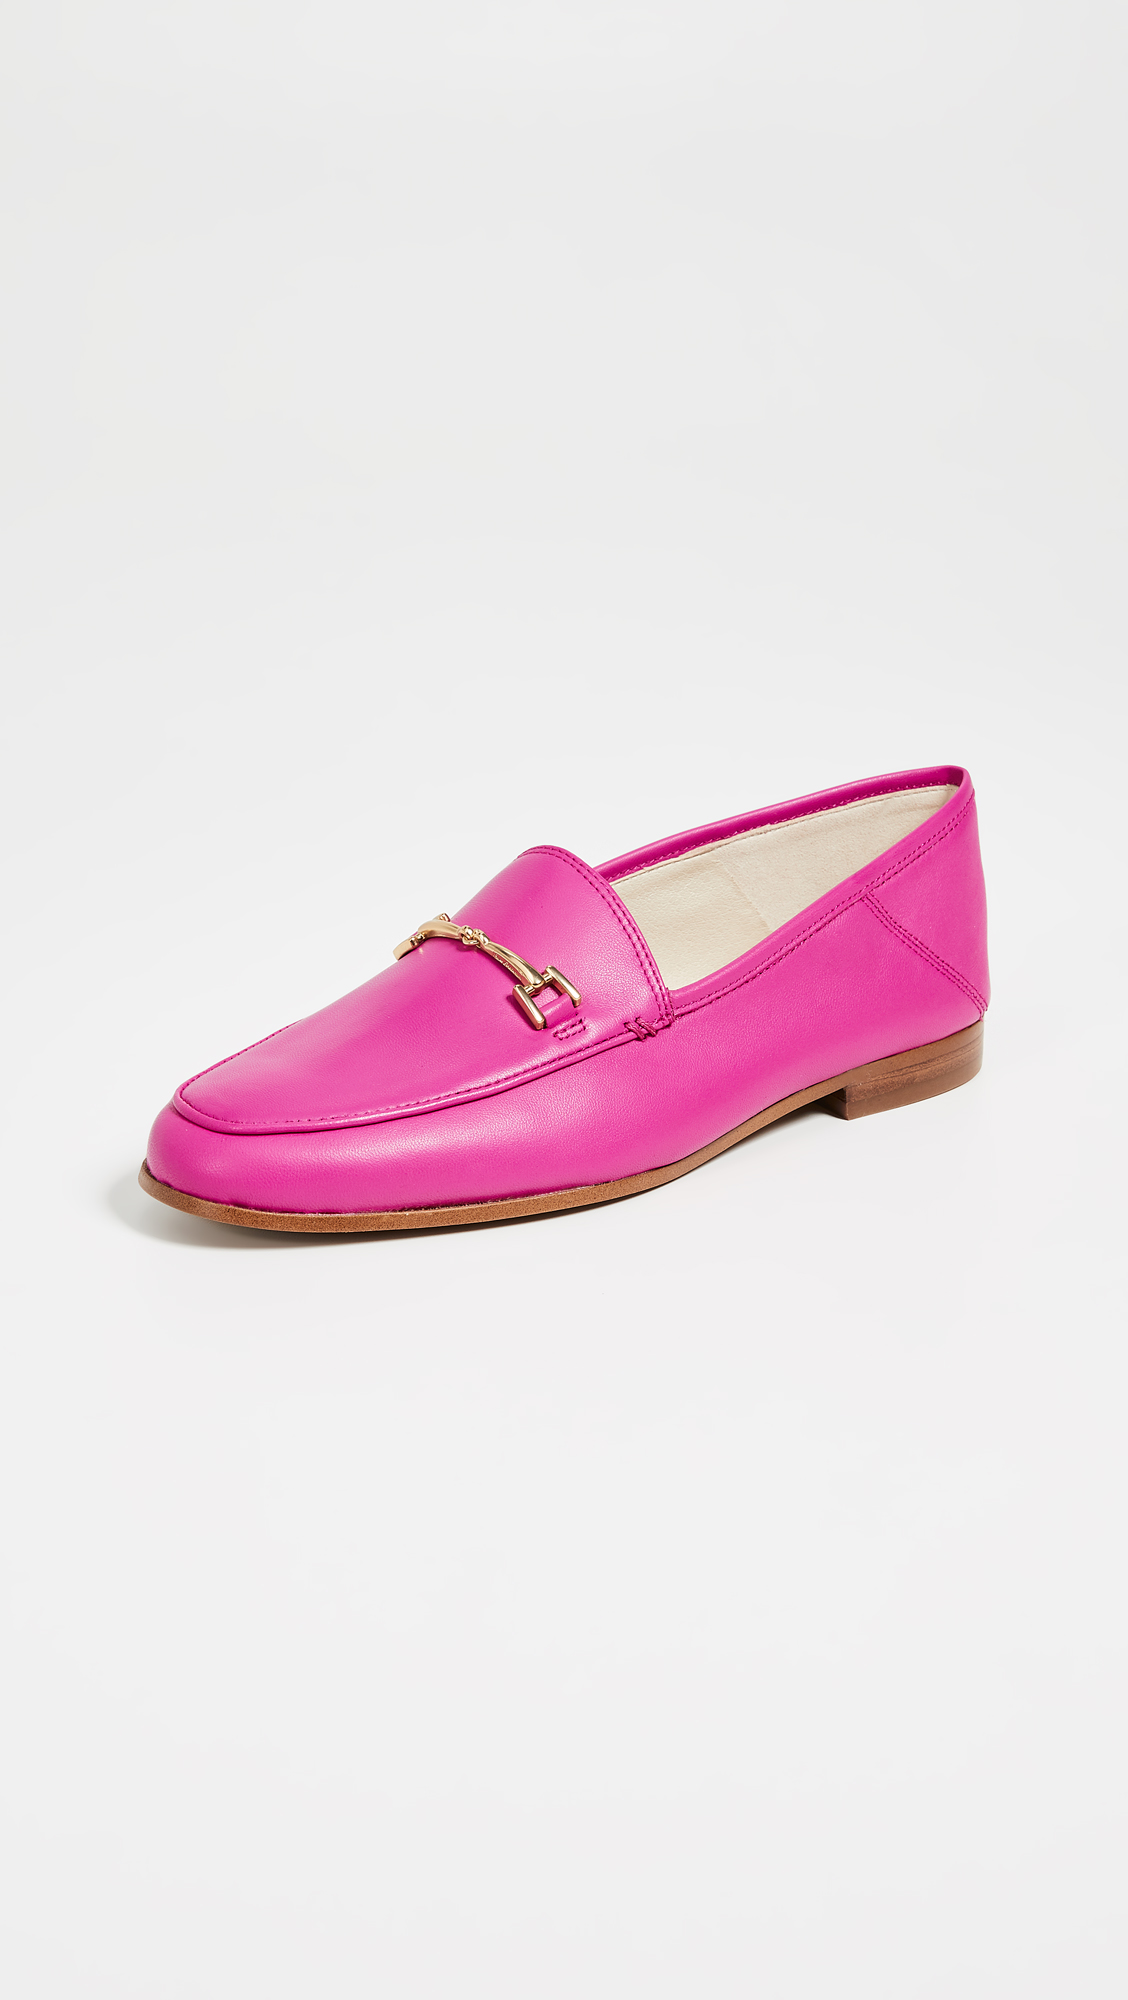 Retro Pink Loafers